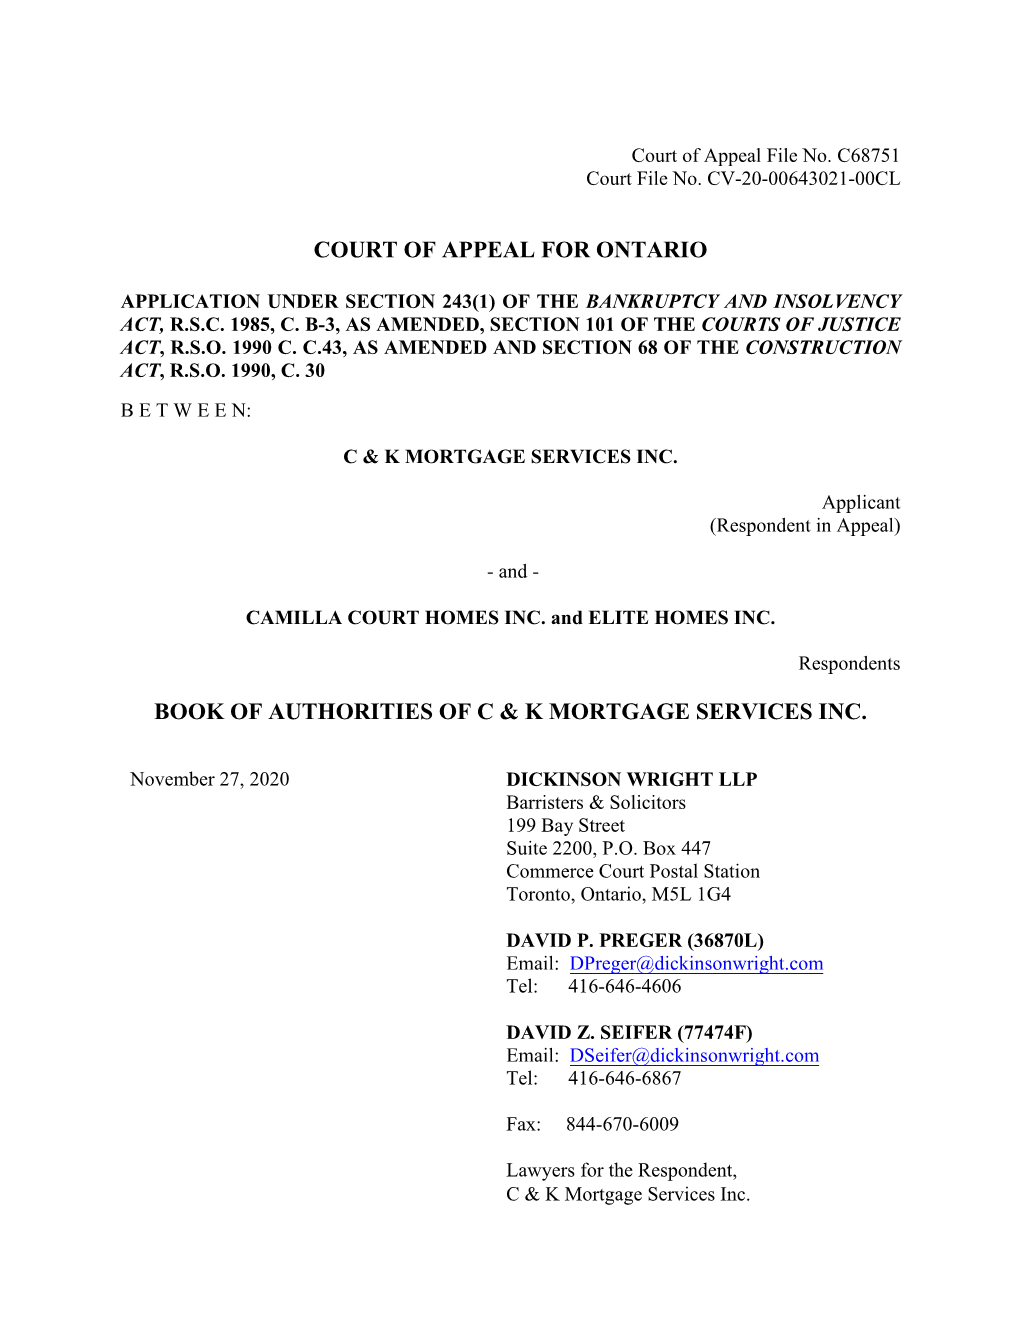 Court of Appeal for Ontario Book of Authorities of C & K